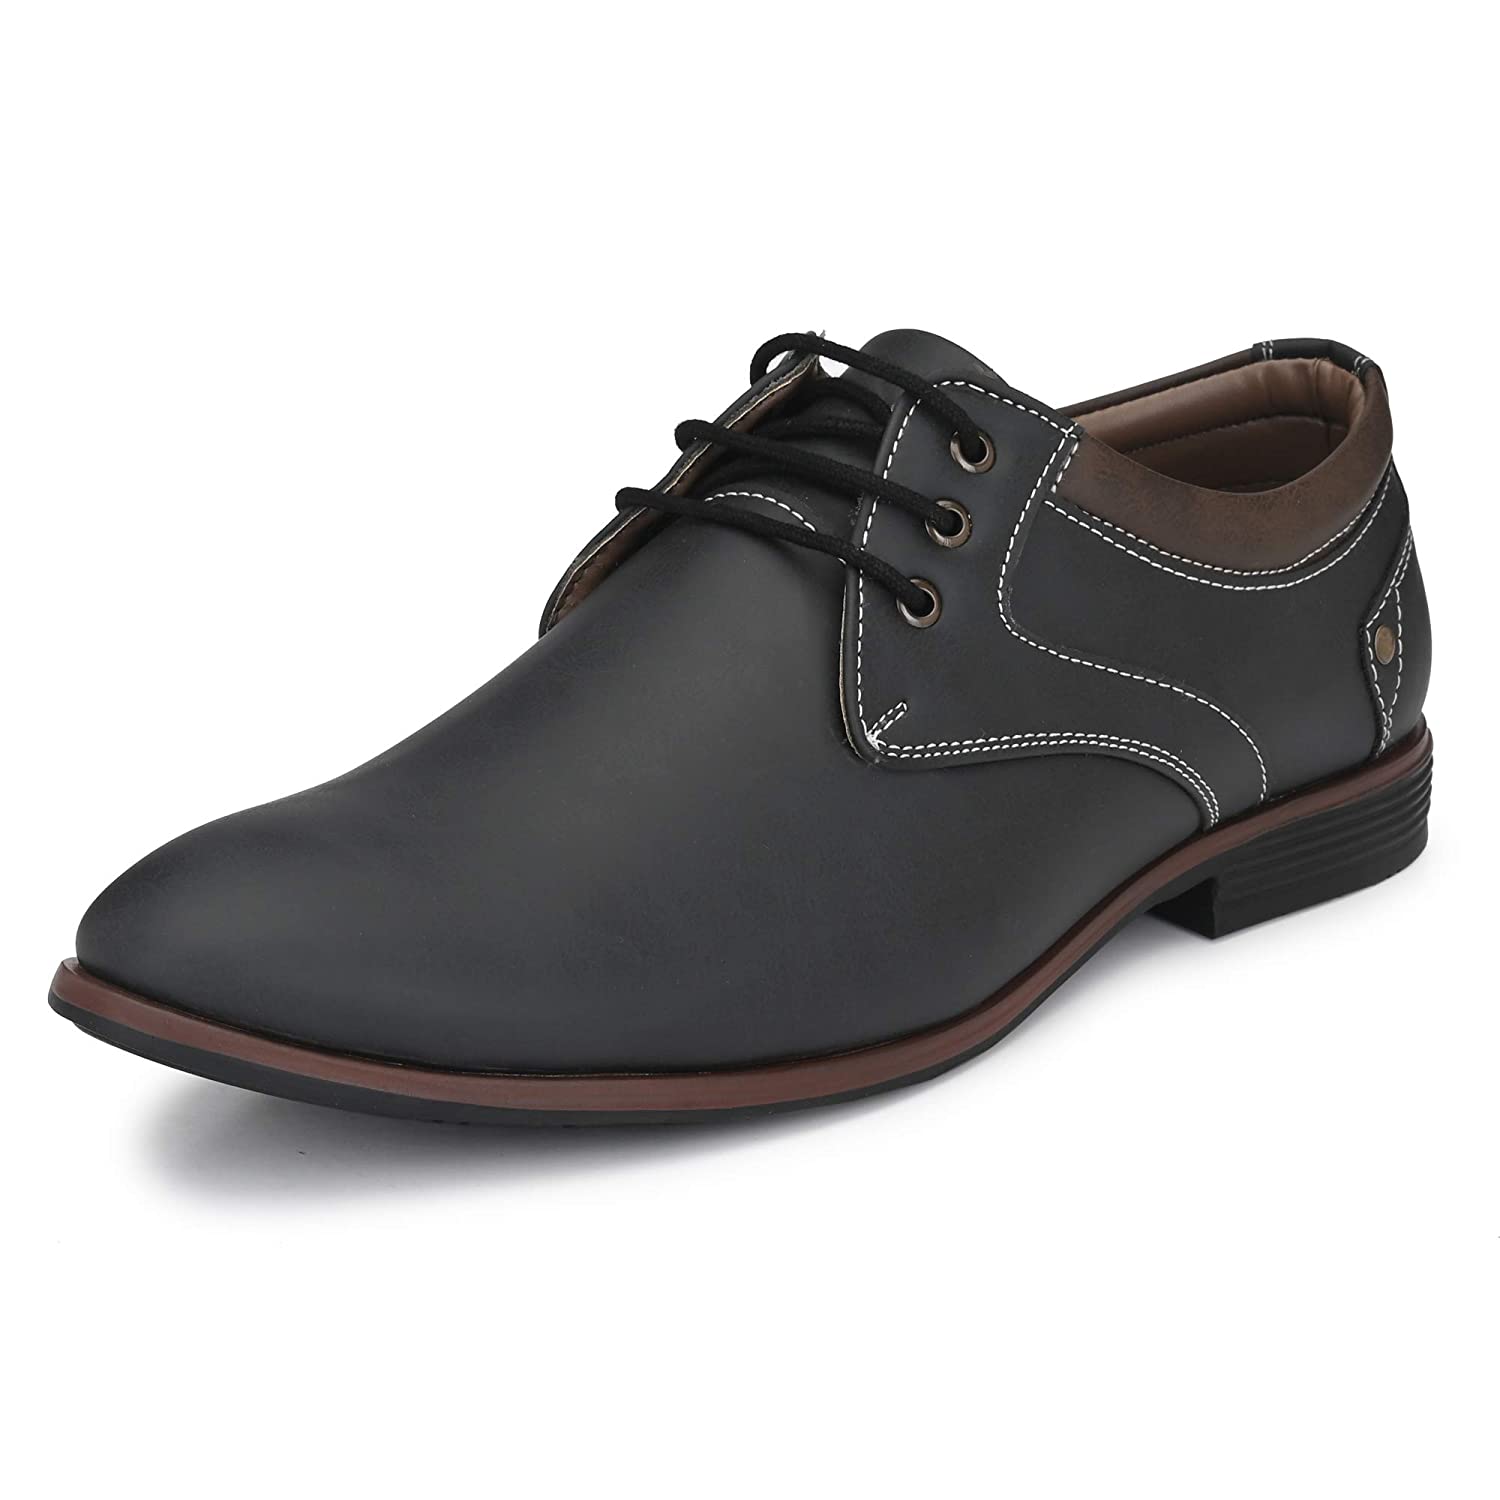 Centrino Men leather shoes brands